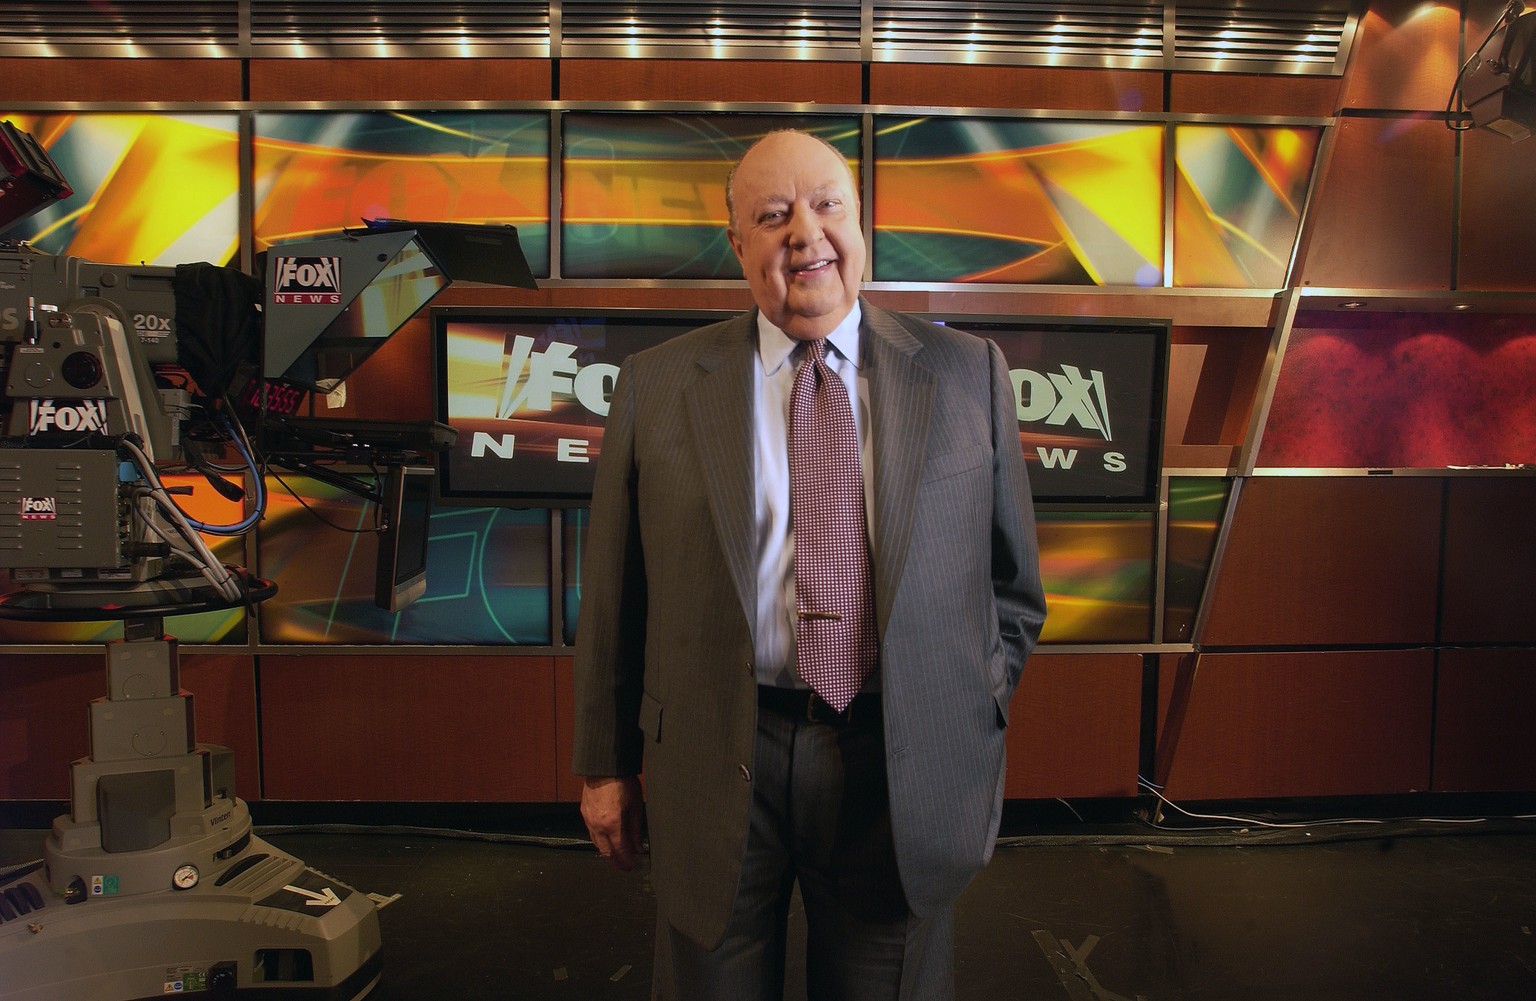 FILE - In this Sept. 29, 2006 file photo, Fox News CEO Roger Ailes poses at Fox News studio in New York. At age 76, Ailes has been vanquished from Fox News Channel, which he masterminded almost 20 yea ...